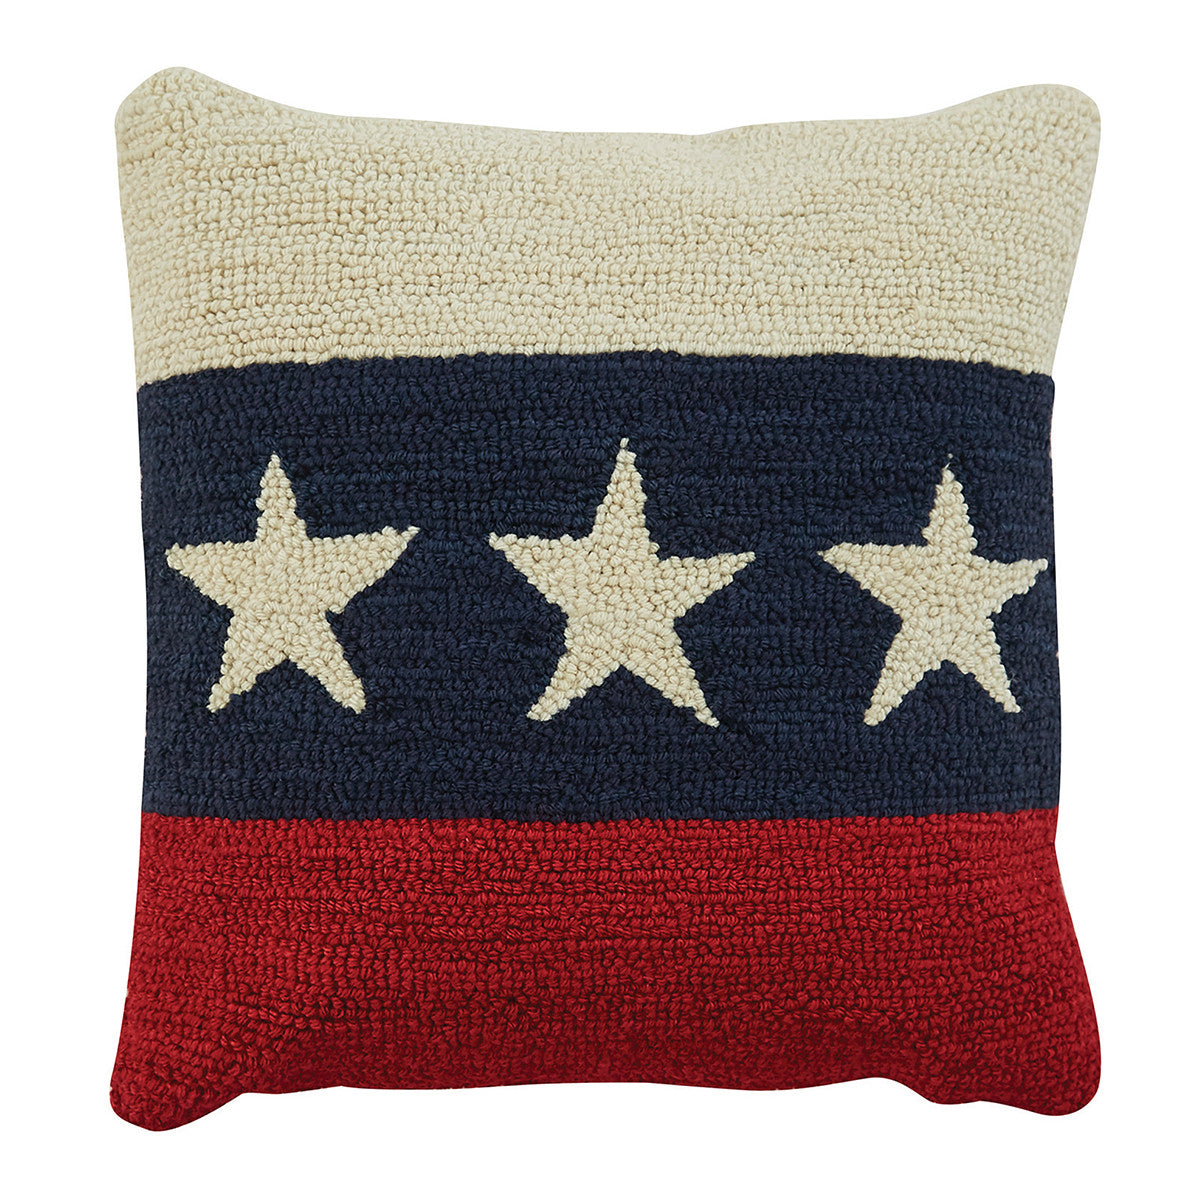 Americana Star Pillow with Feather Insert 18"x18" - Park Designs